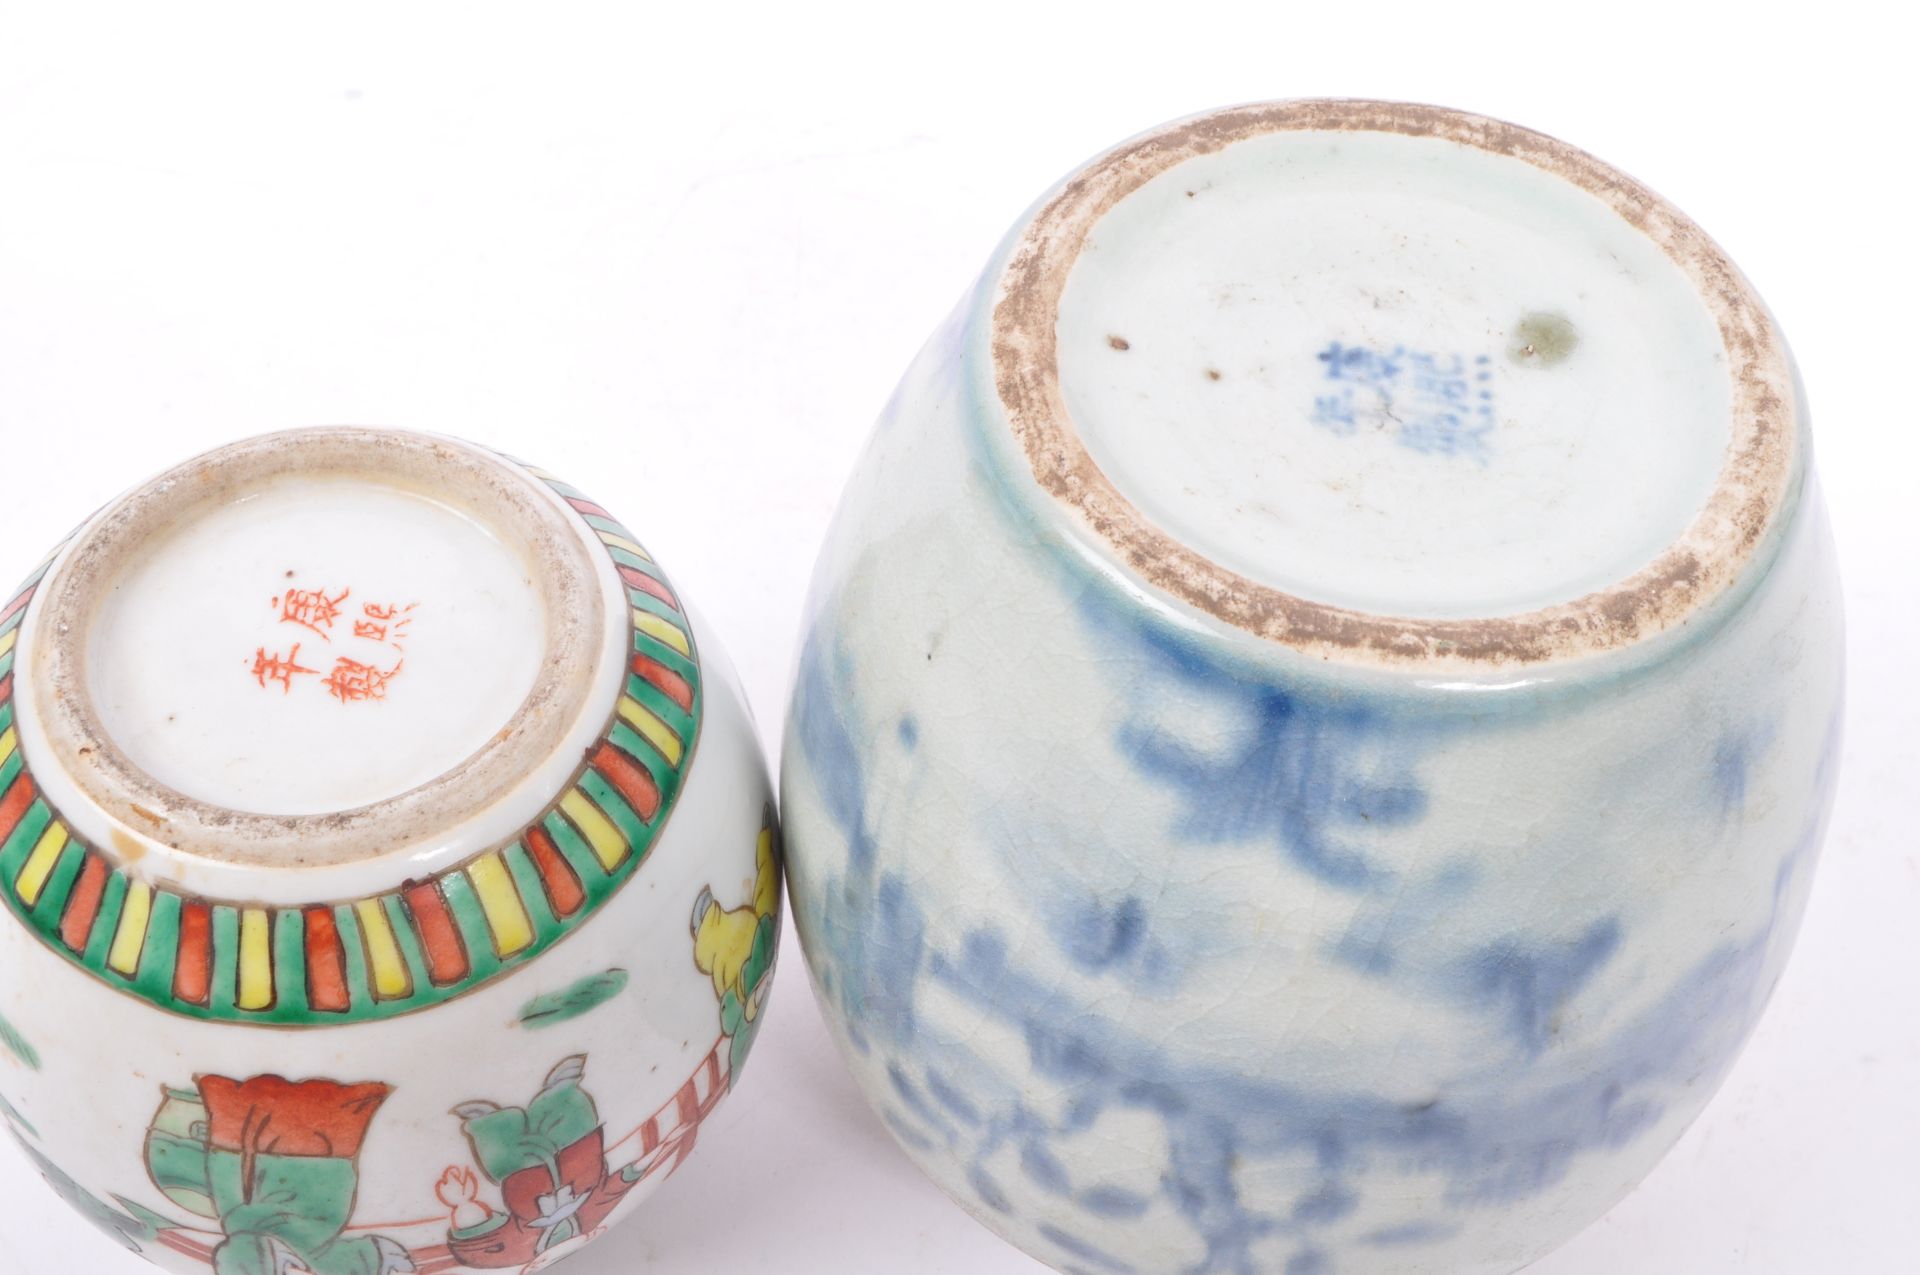 COLLECTION OF 19TH CENTURY CHINESE PORCELAIN GINGER JARS - Image 8 of 8